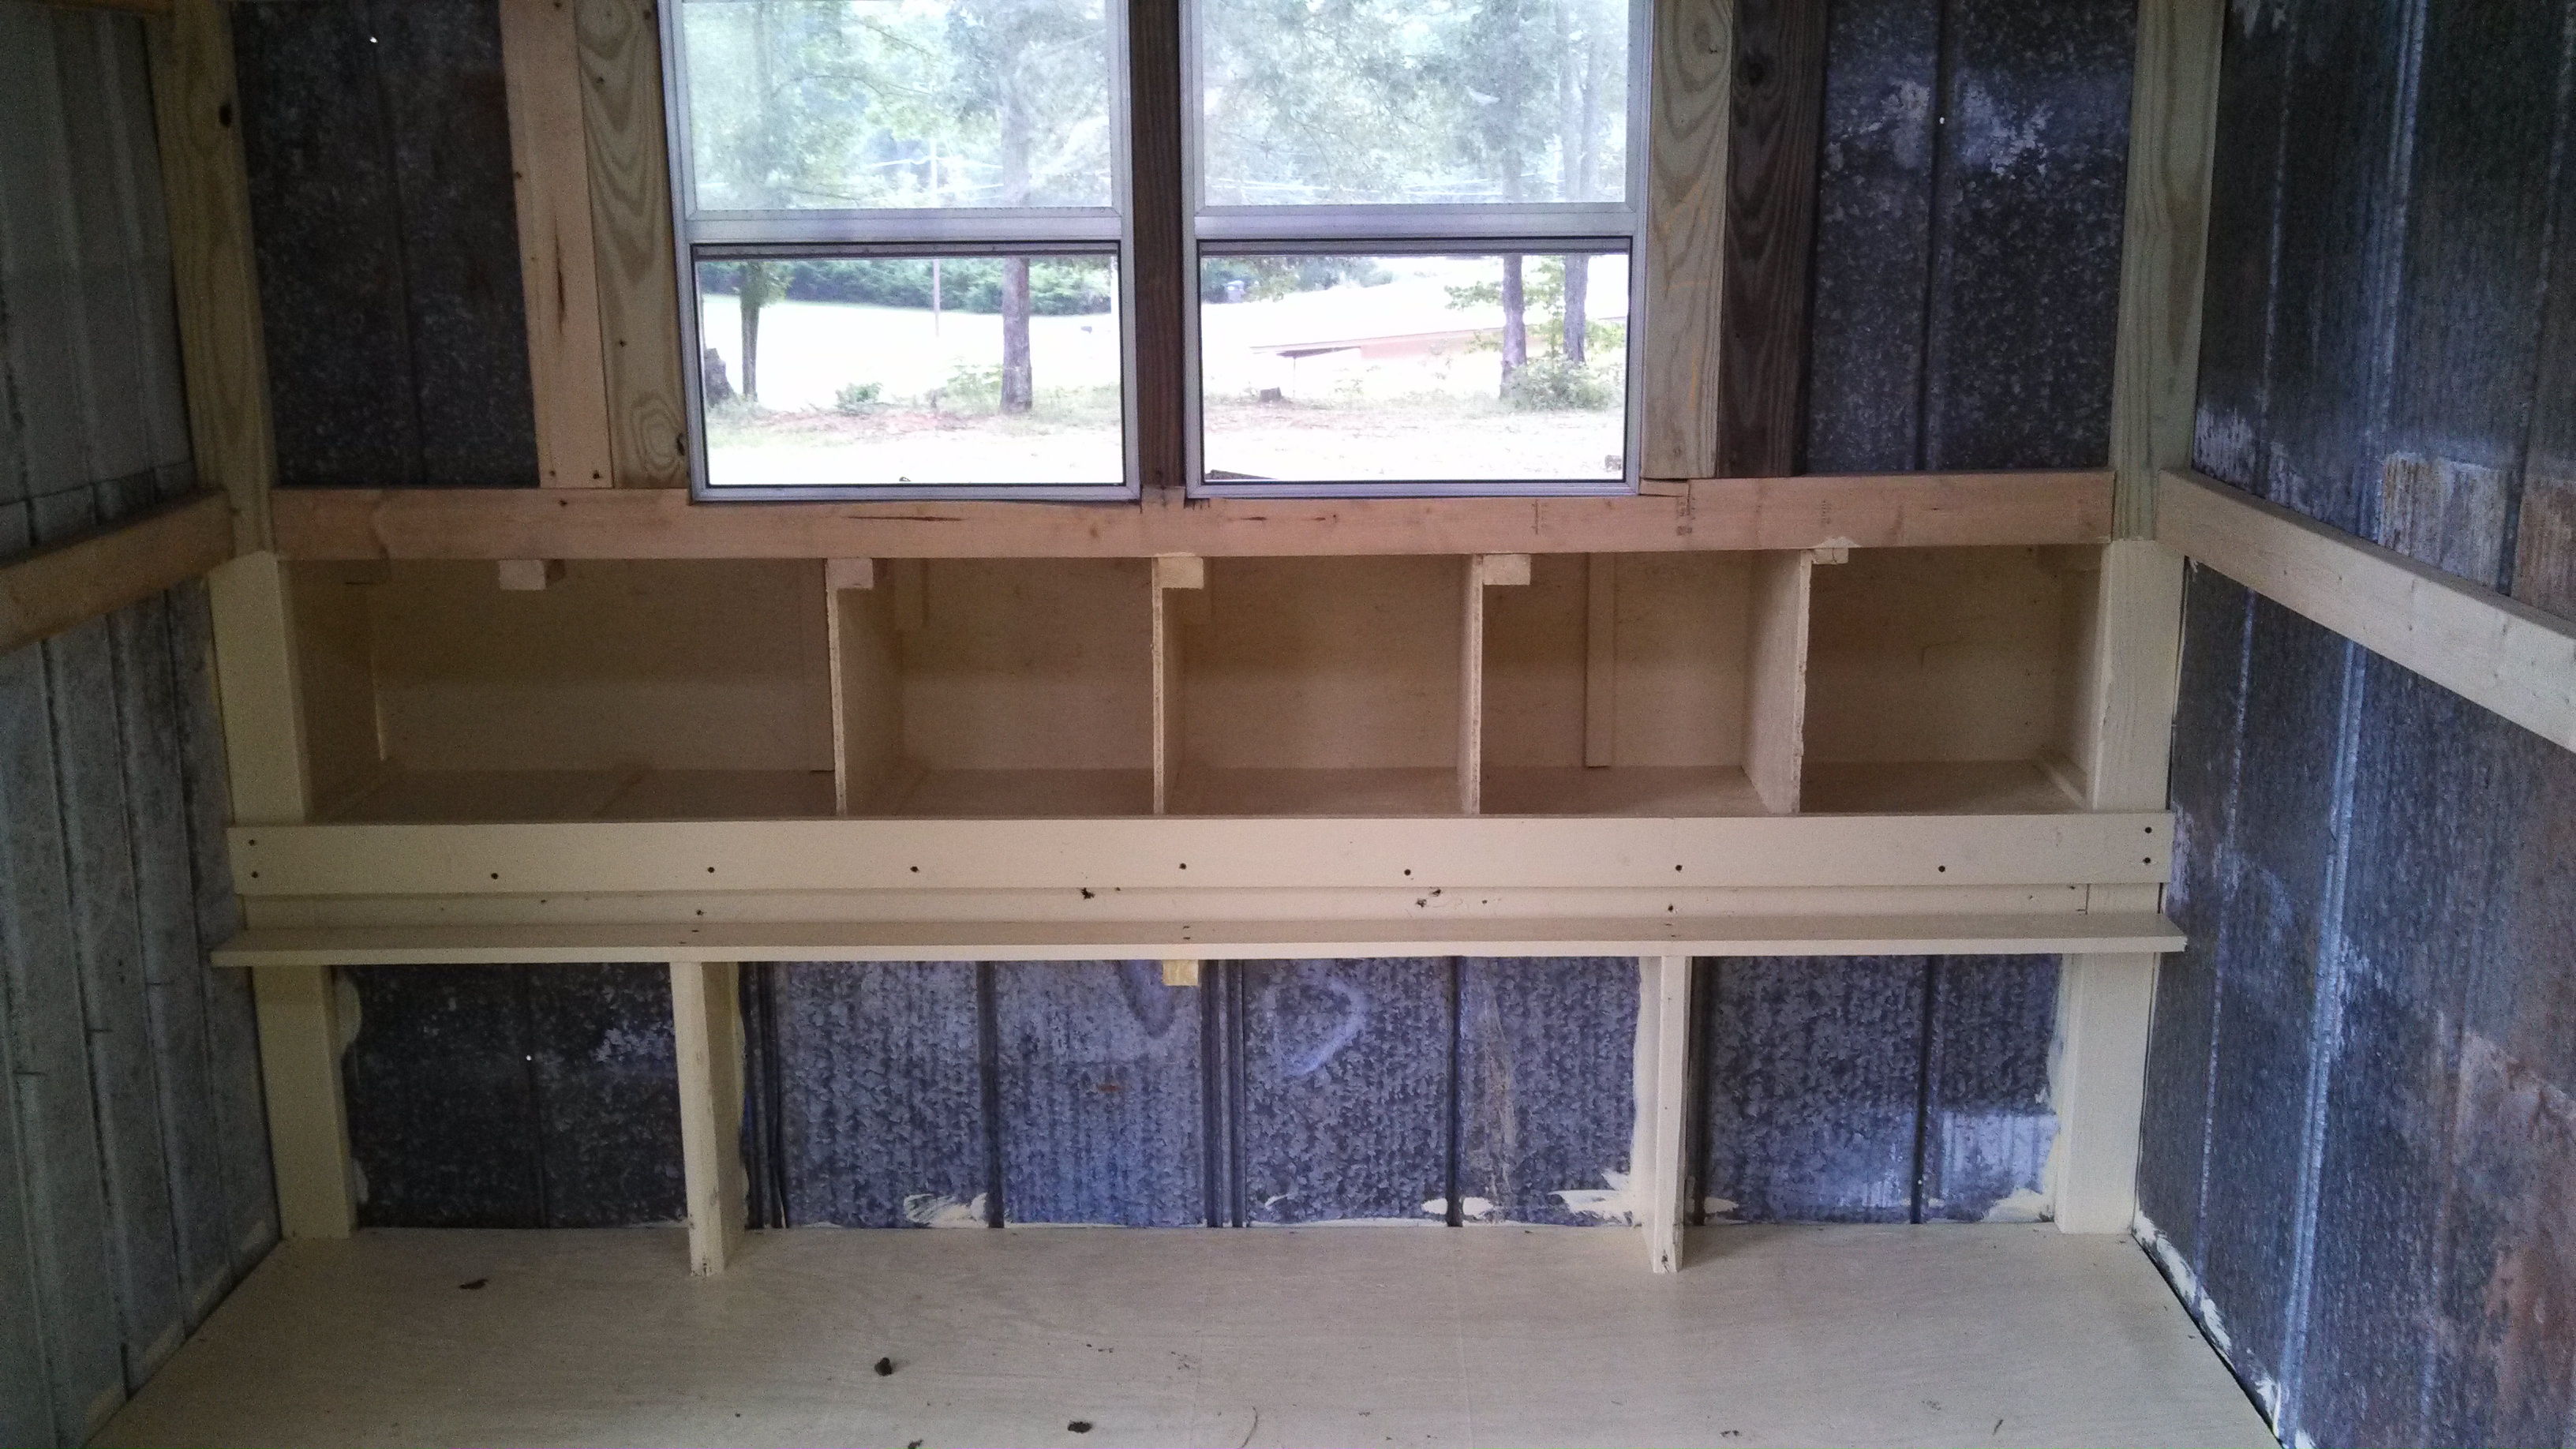 Here are the nesting boxes built and painted except for one divider, I have to make another trip to the hardware store.